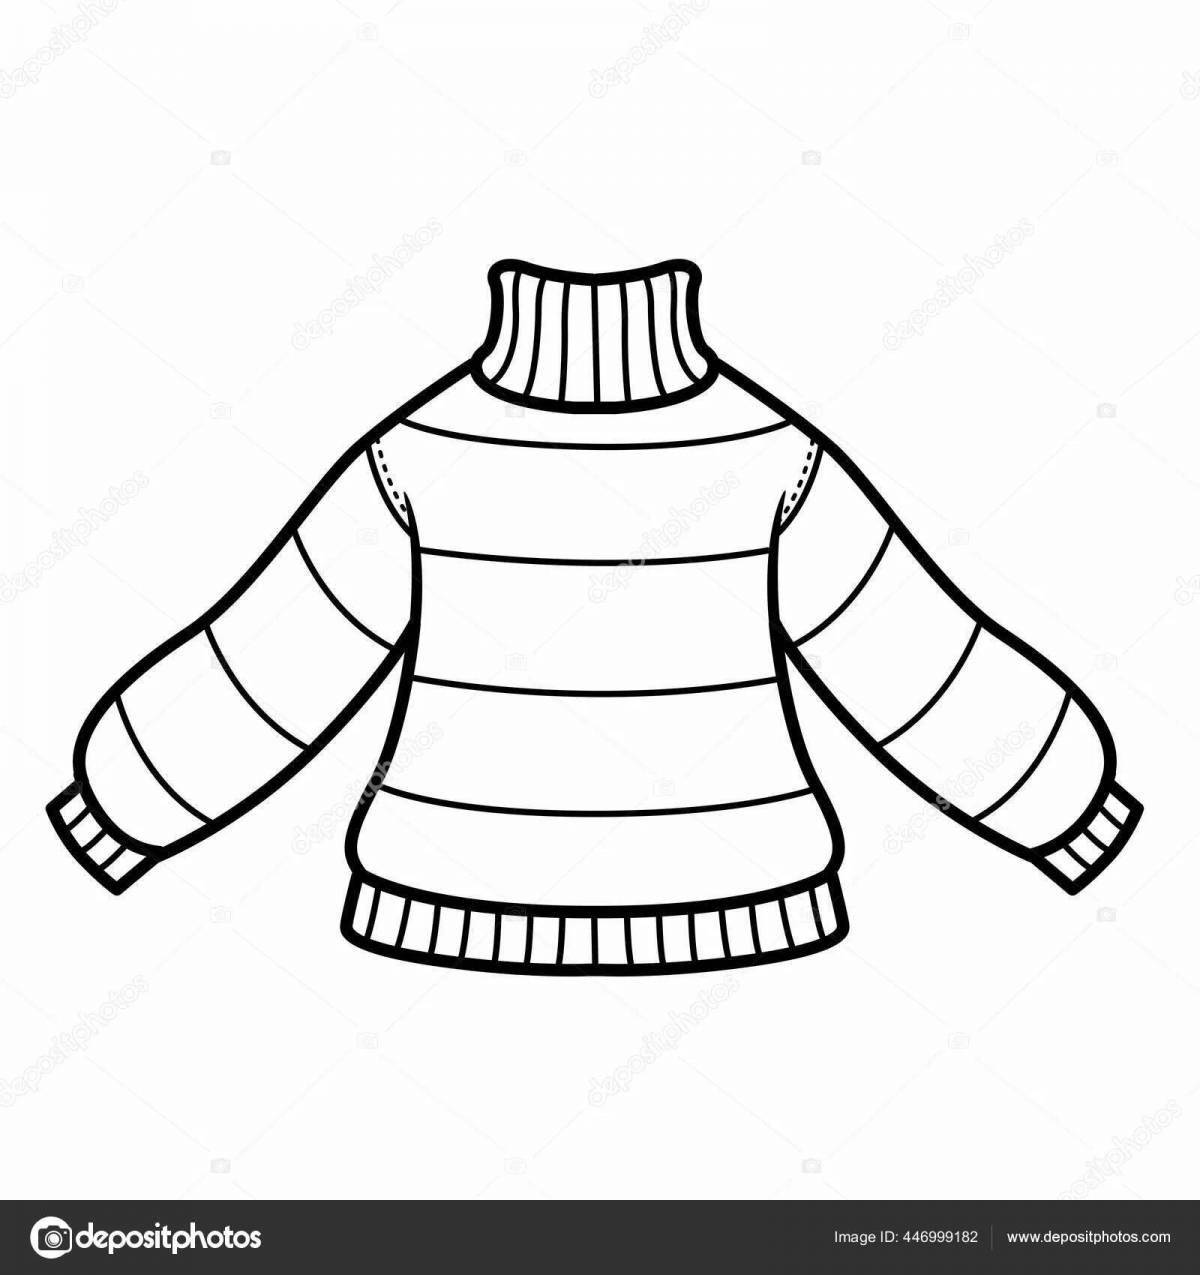 Glowing sweater coloring page for preschoolers